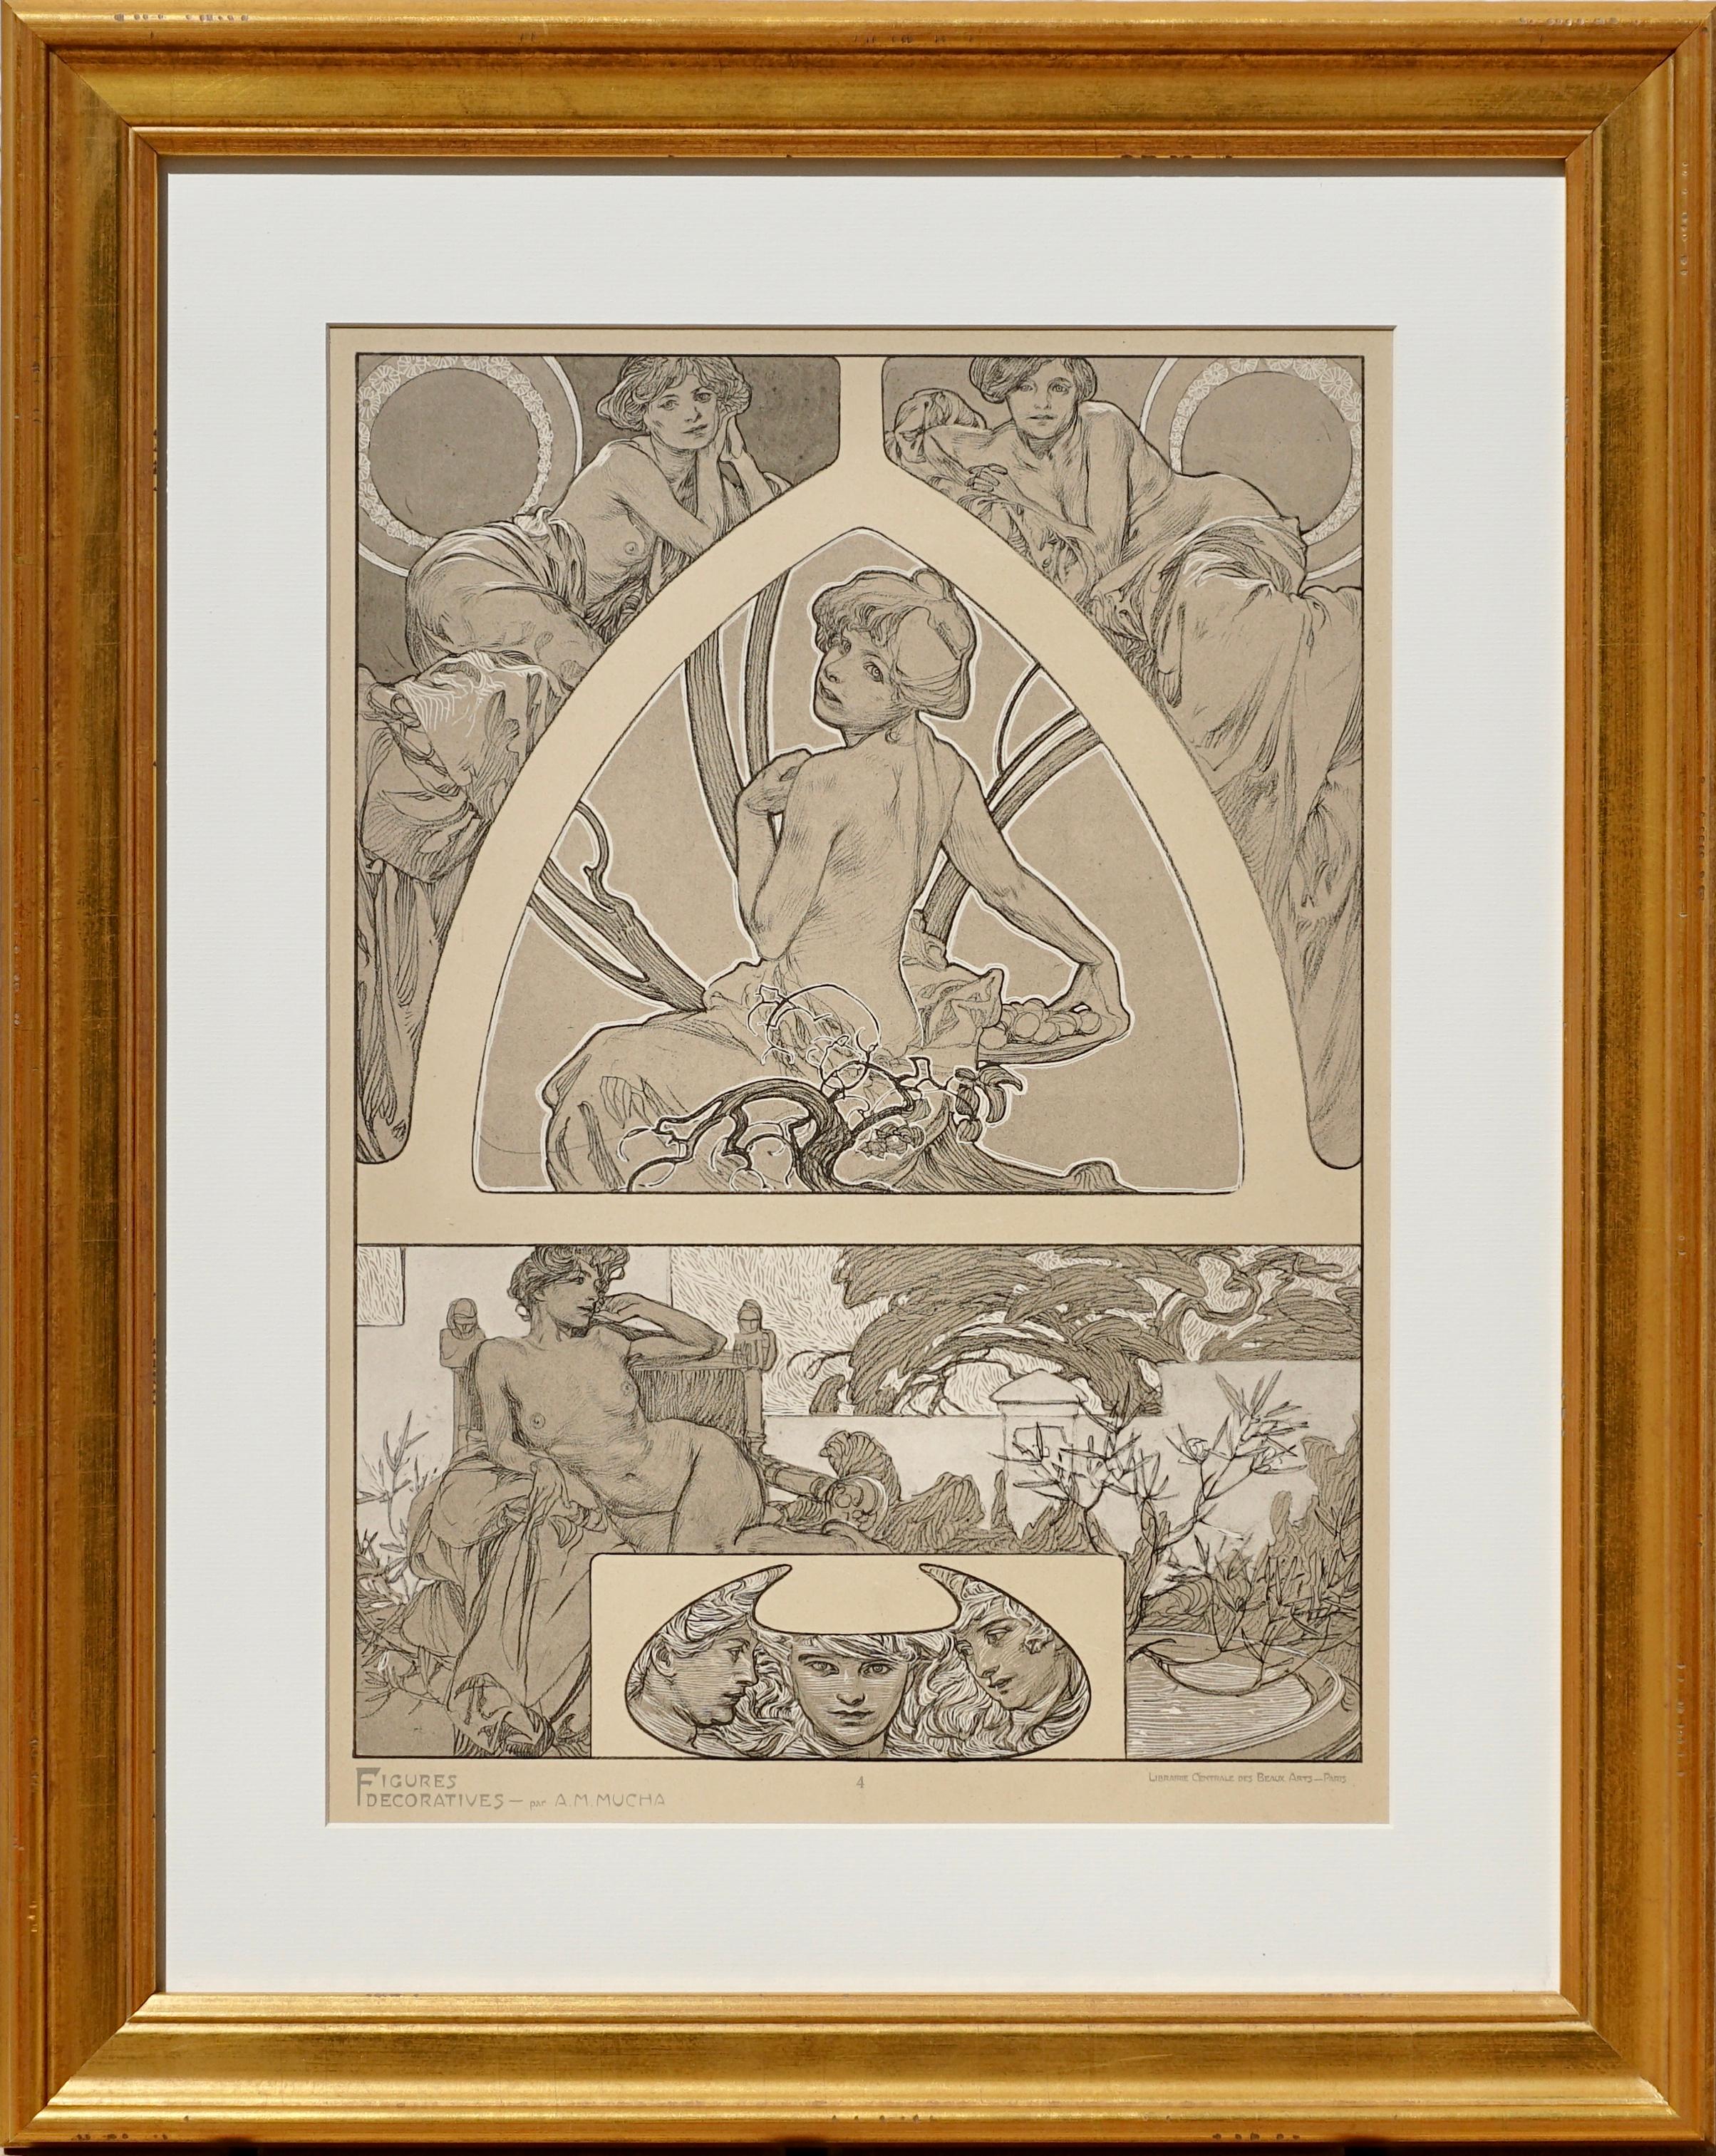 A framed Art Nouveau lithograph collotype poster by Alphone Mucha from 1905 representing the artist’s sketches of nudes, women and beautiful ladies in blacks and white pigments on vellum paper. Plate 4 of “Figures Decoratives par A. M. Mucha,”